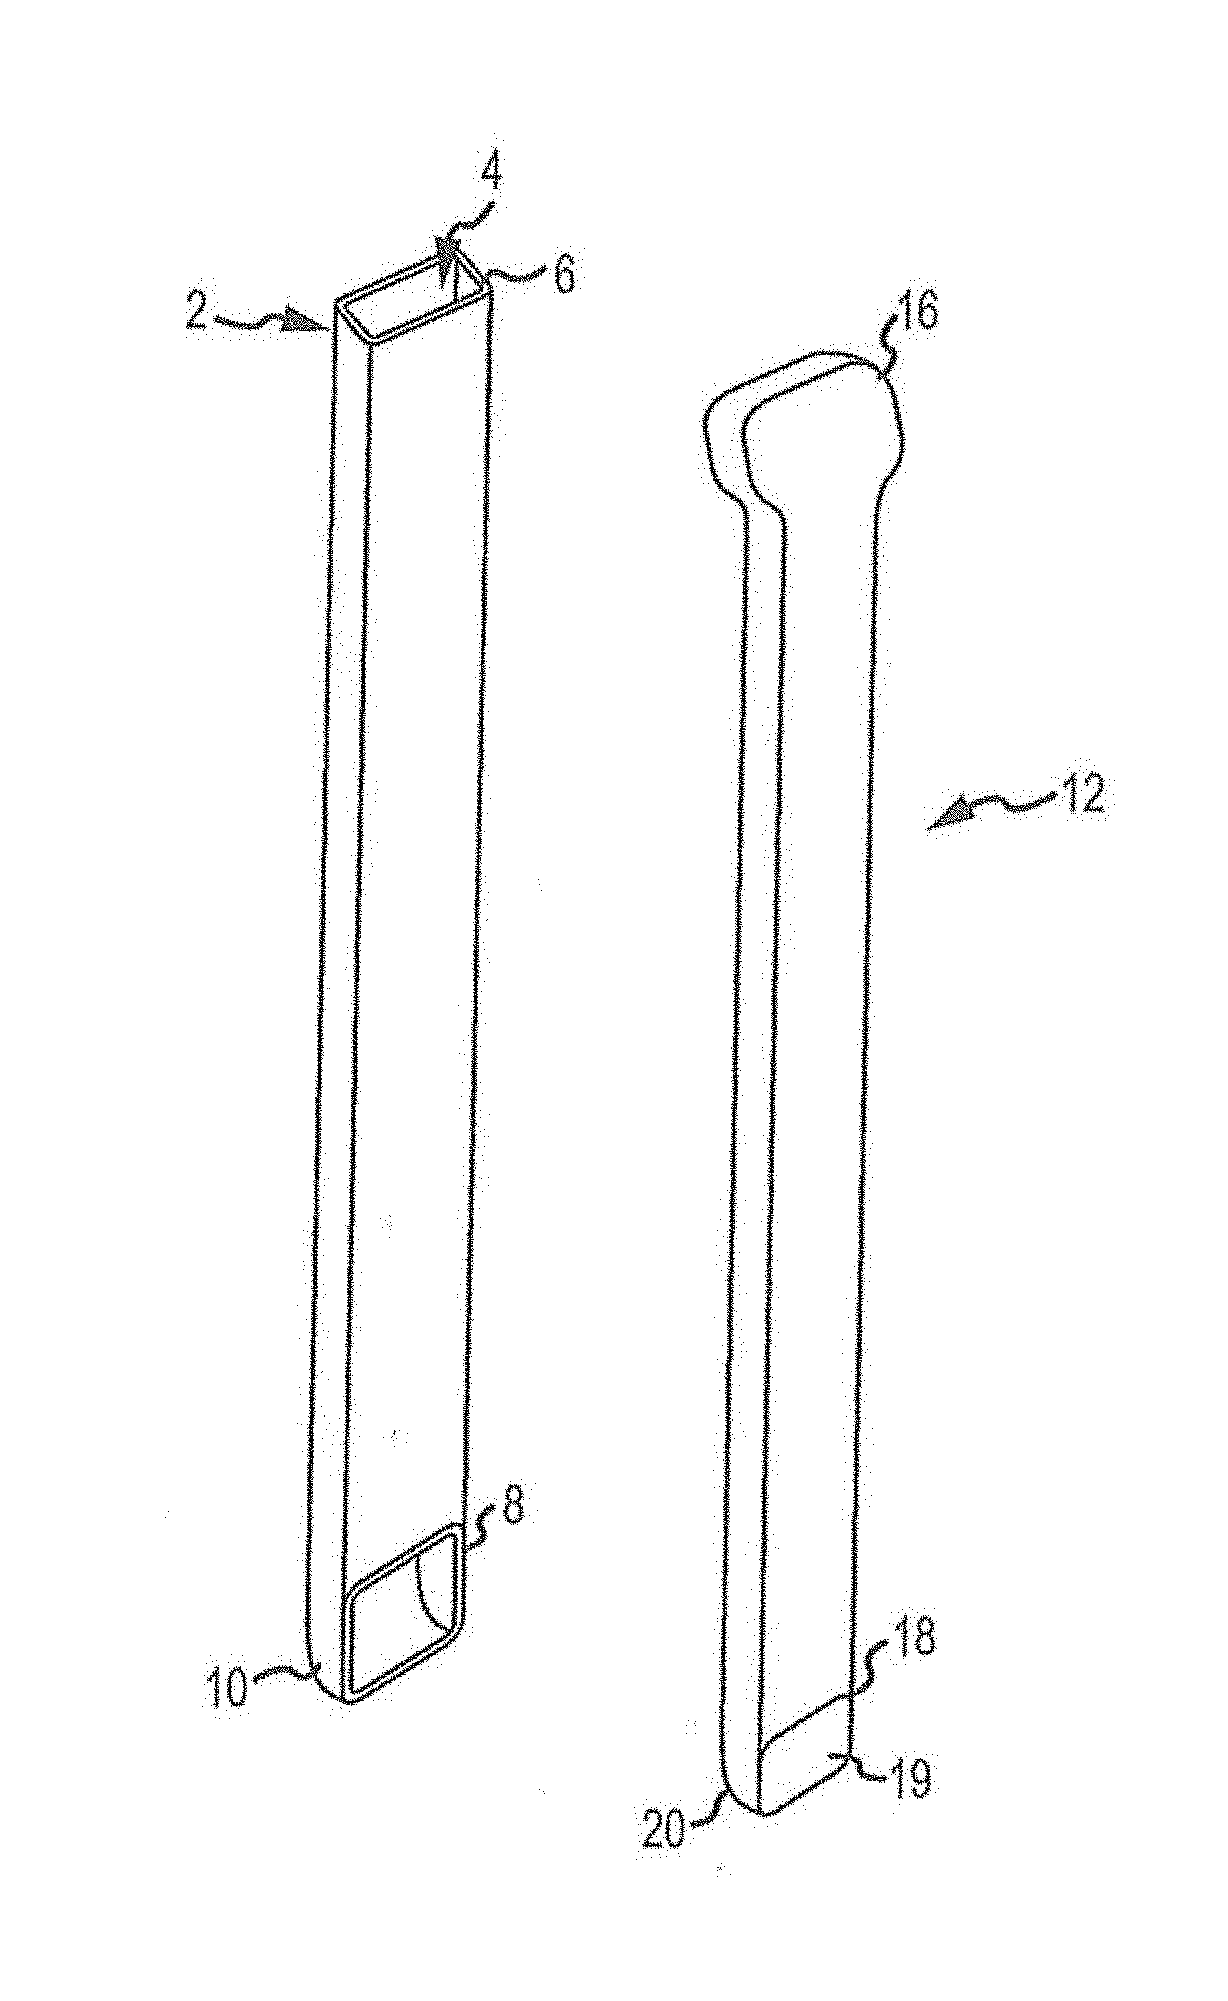 Bone graft delivery device with positioning handle